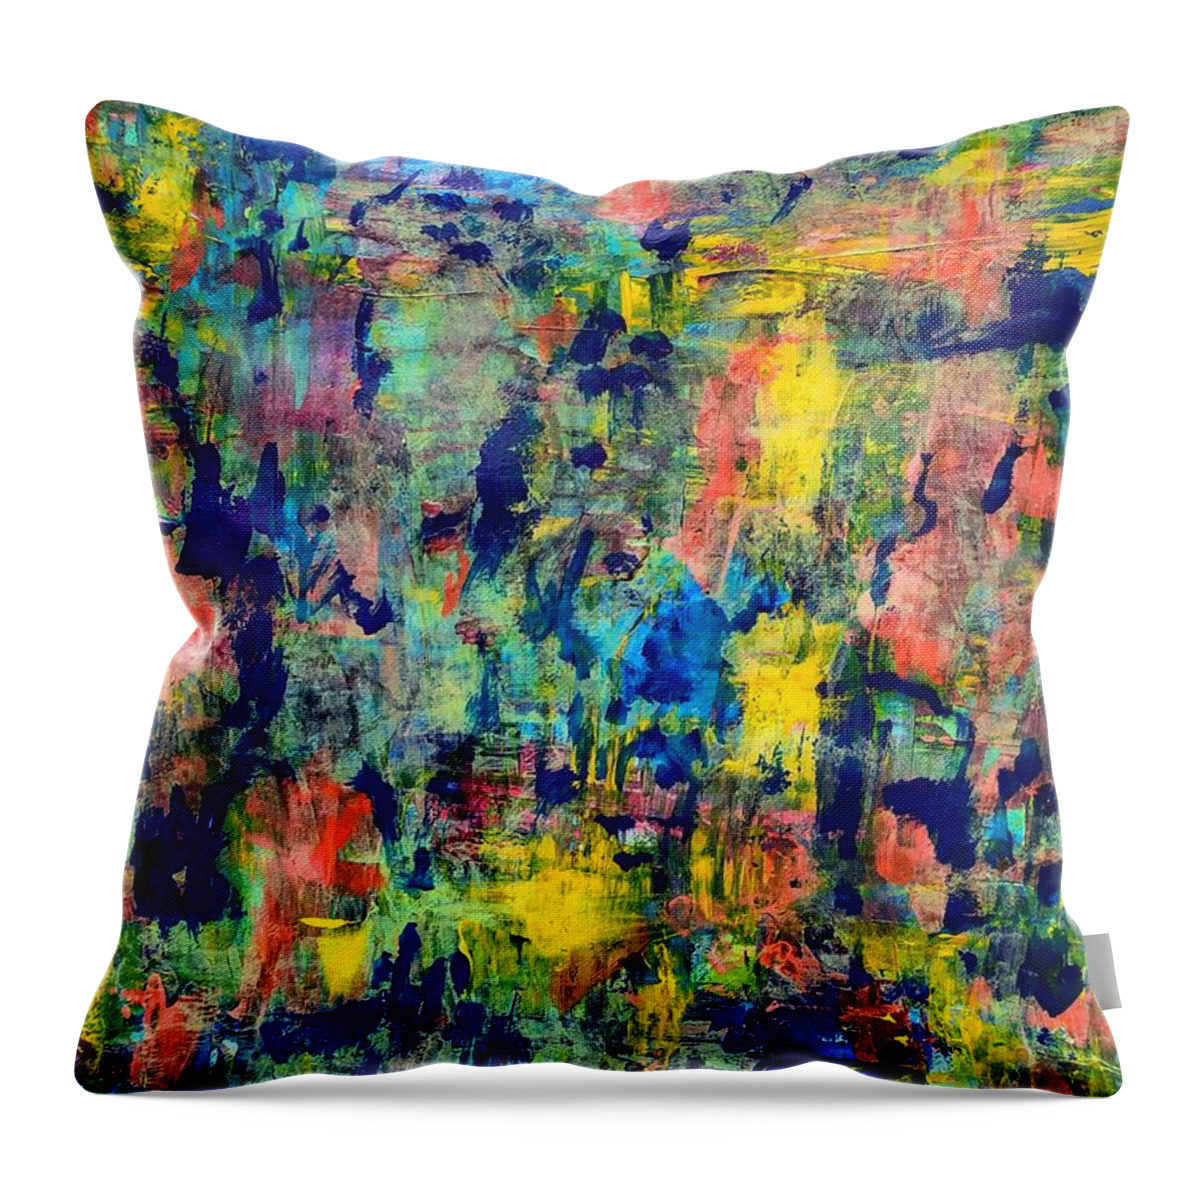 Patchwork Of Color Throw Pillow featuring the painting Patchwork of Color by Esther Newman-Cohen